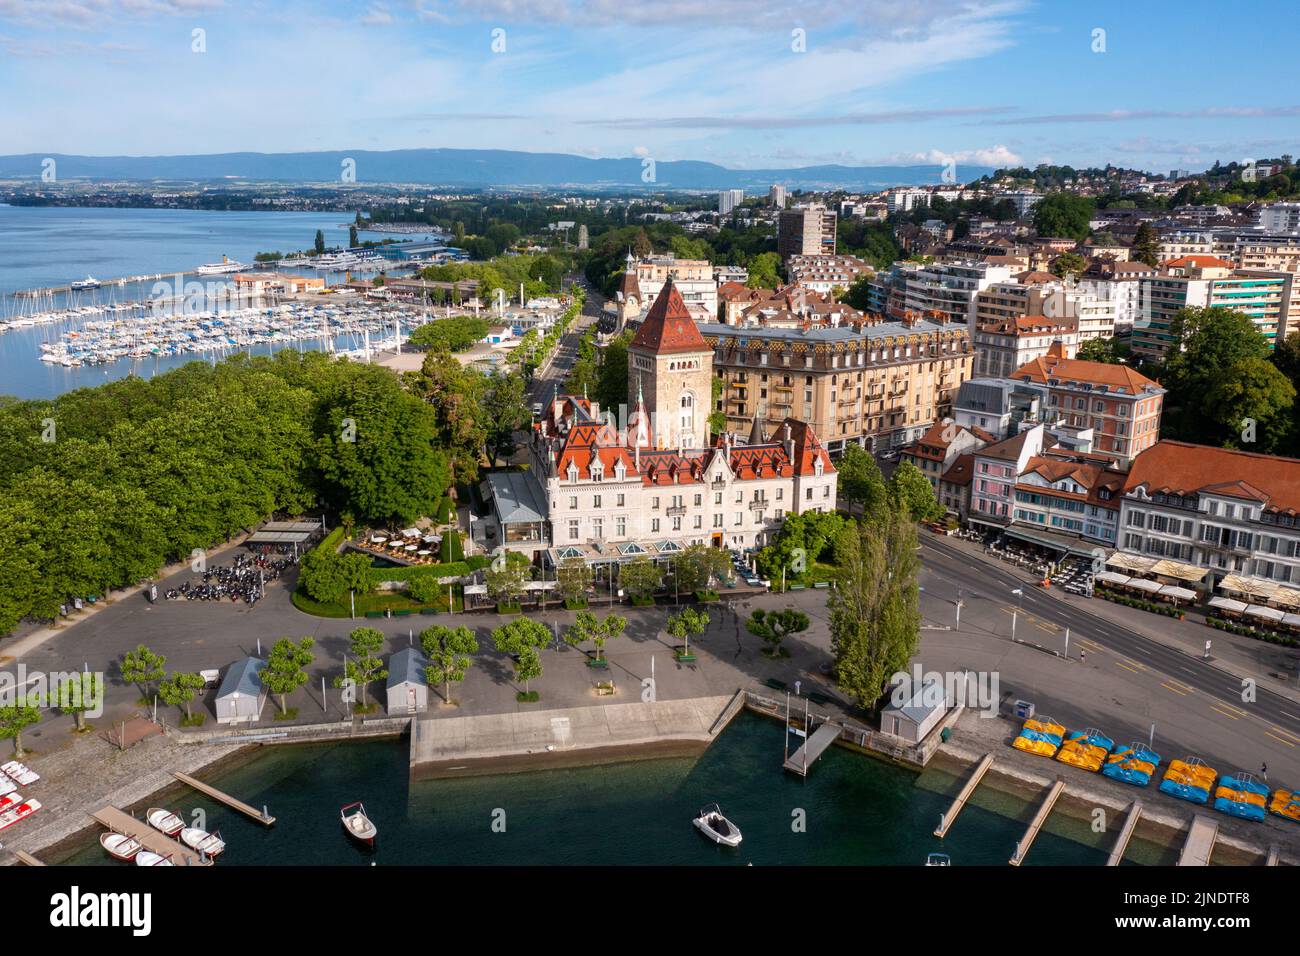 Château d'Ouchy, Lausanne, Switzerland Stock Photo